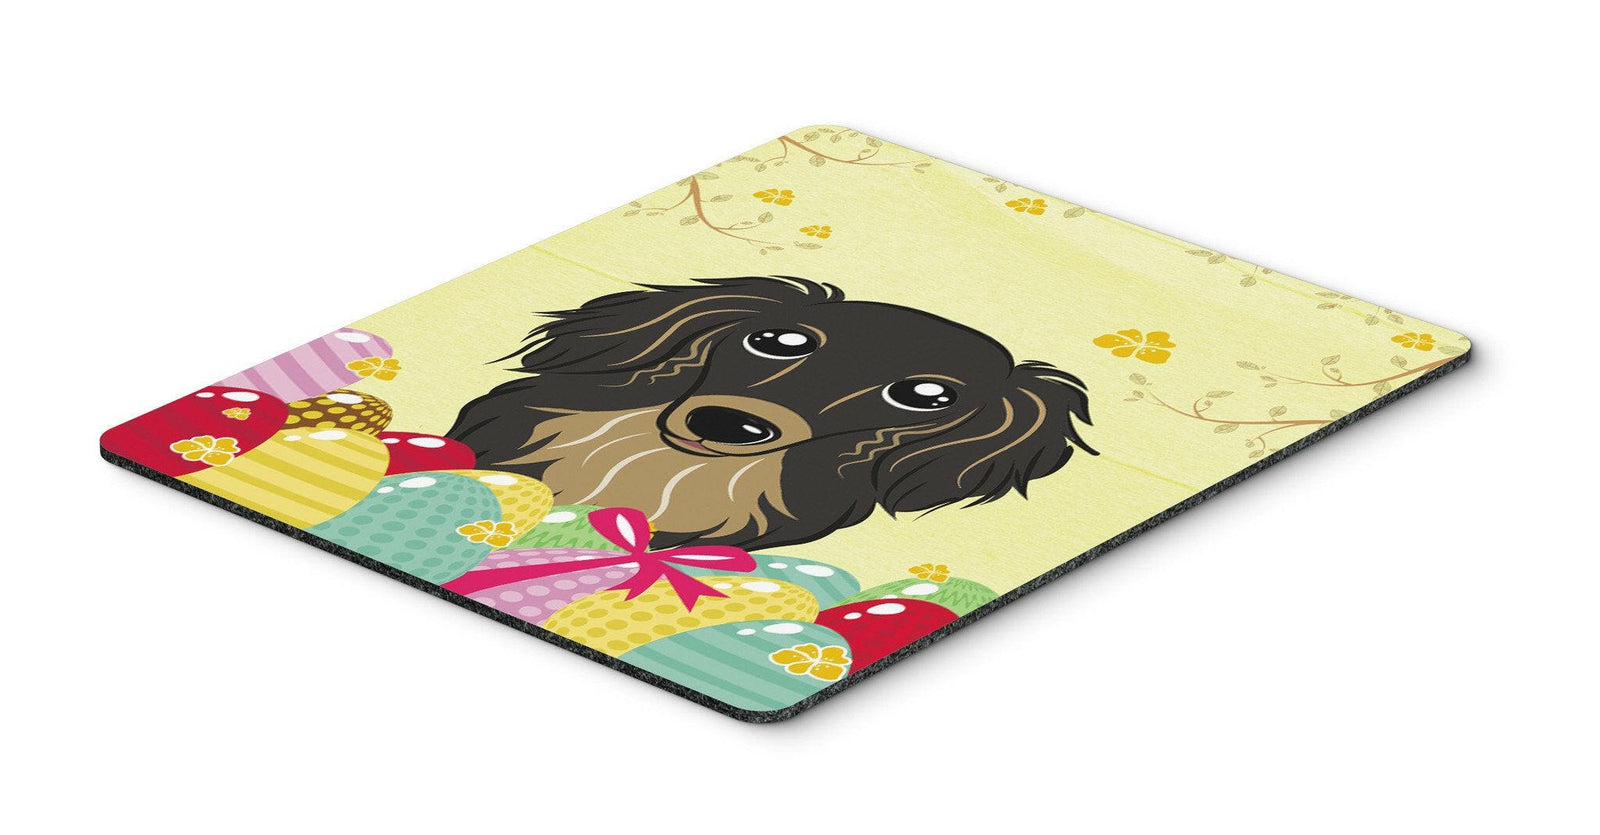 Longhair Black and Tan Dachshund Easter Egg Hunt Mouse Pad, Hot Pad or Trivet BB1895MP by Caroline's Treasures